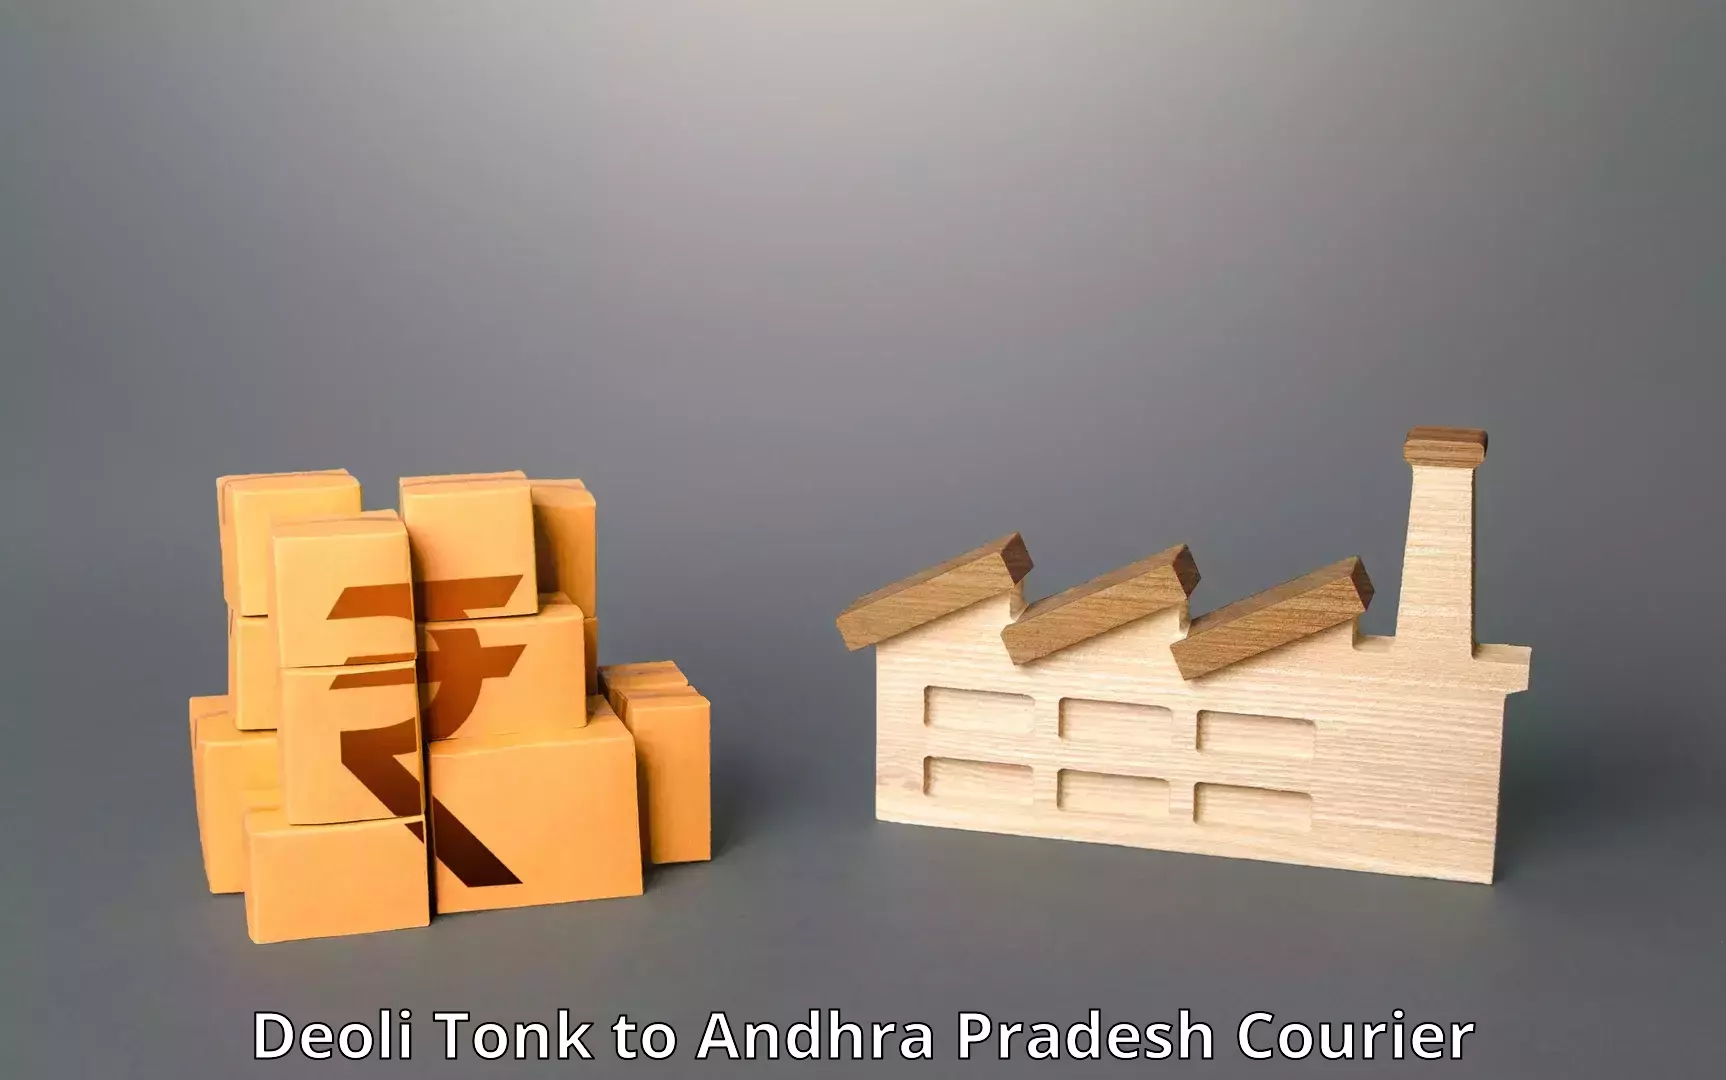 Round-the-clock parcel delivery Deoli Tonk to Rajahmundry